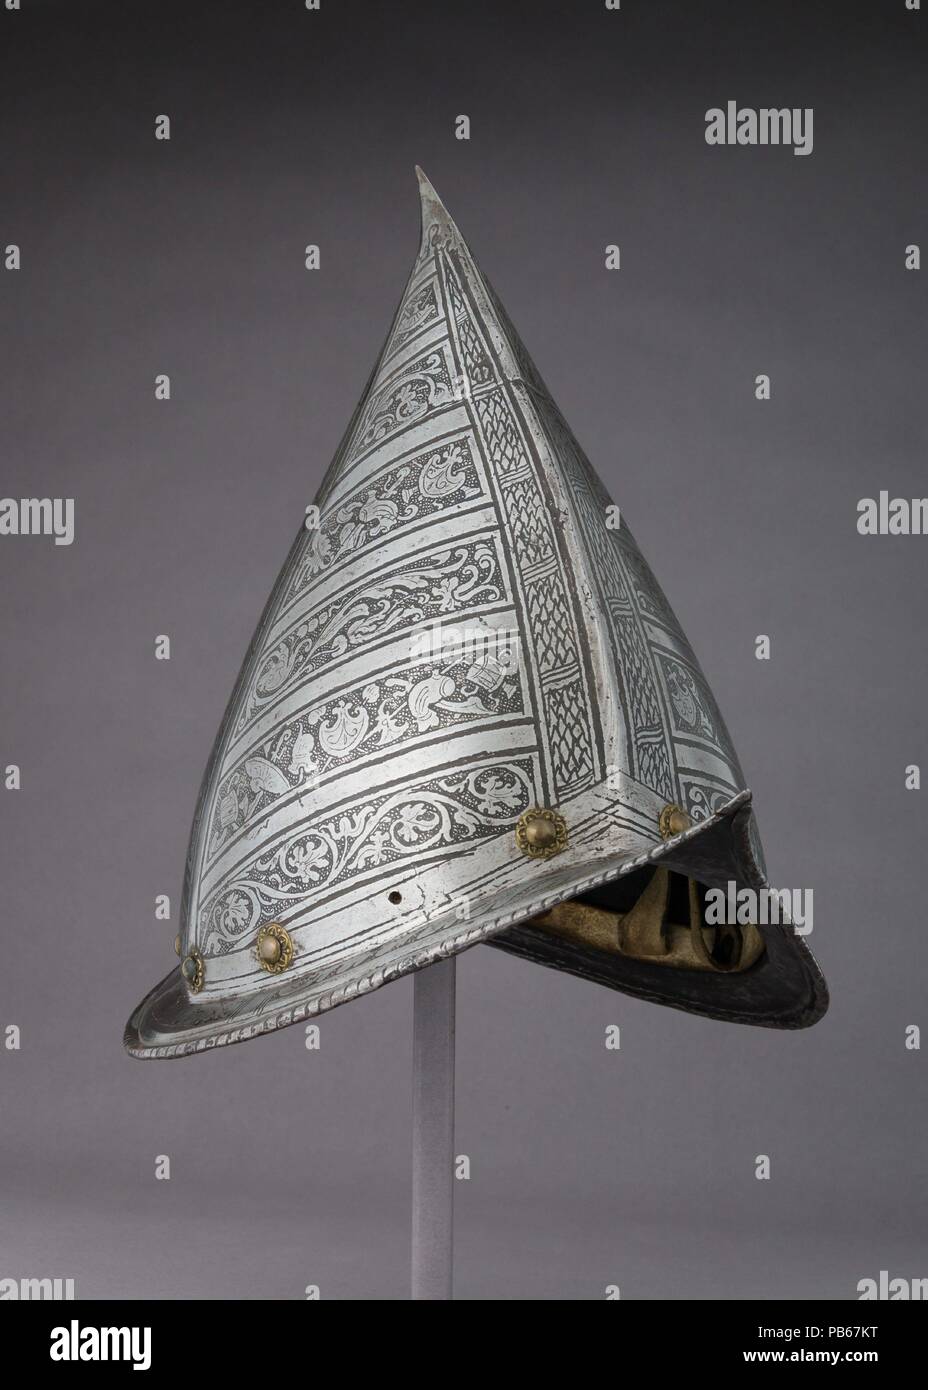 Morion-Cabasset. Culture: Italian. Dimensions: H. 11 3/4 in. (29.8 cm); W. 9 1/4 in. (23.5 cm); D. 13 3/4 in. (34.9 cm); Wt. 3 lb. 9 oz. (1610 g). Date: ca. 1575. Museum: Metropolitan Museum of Art, New York, USA. Stock Photo